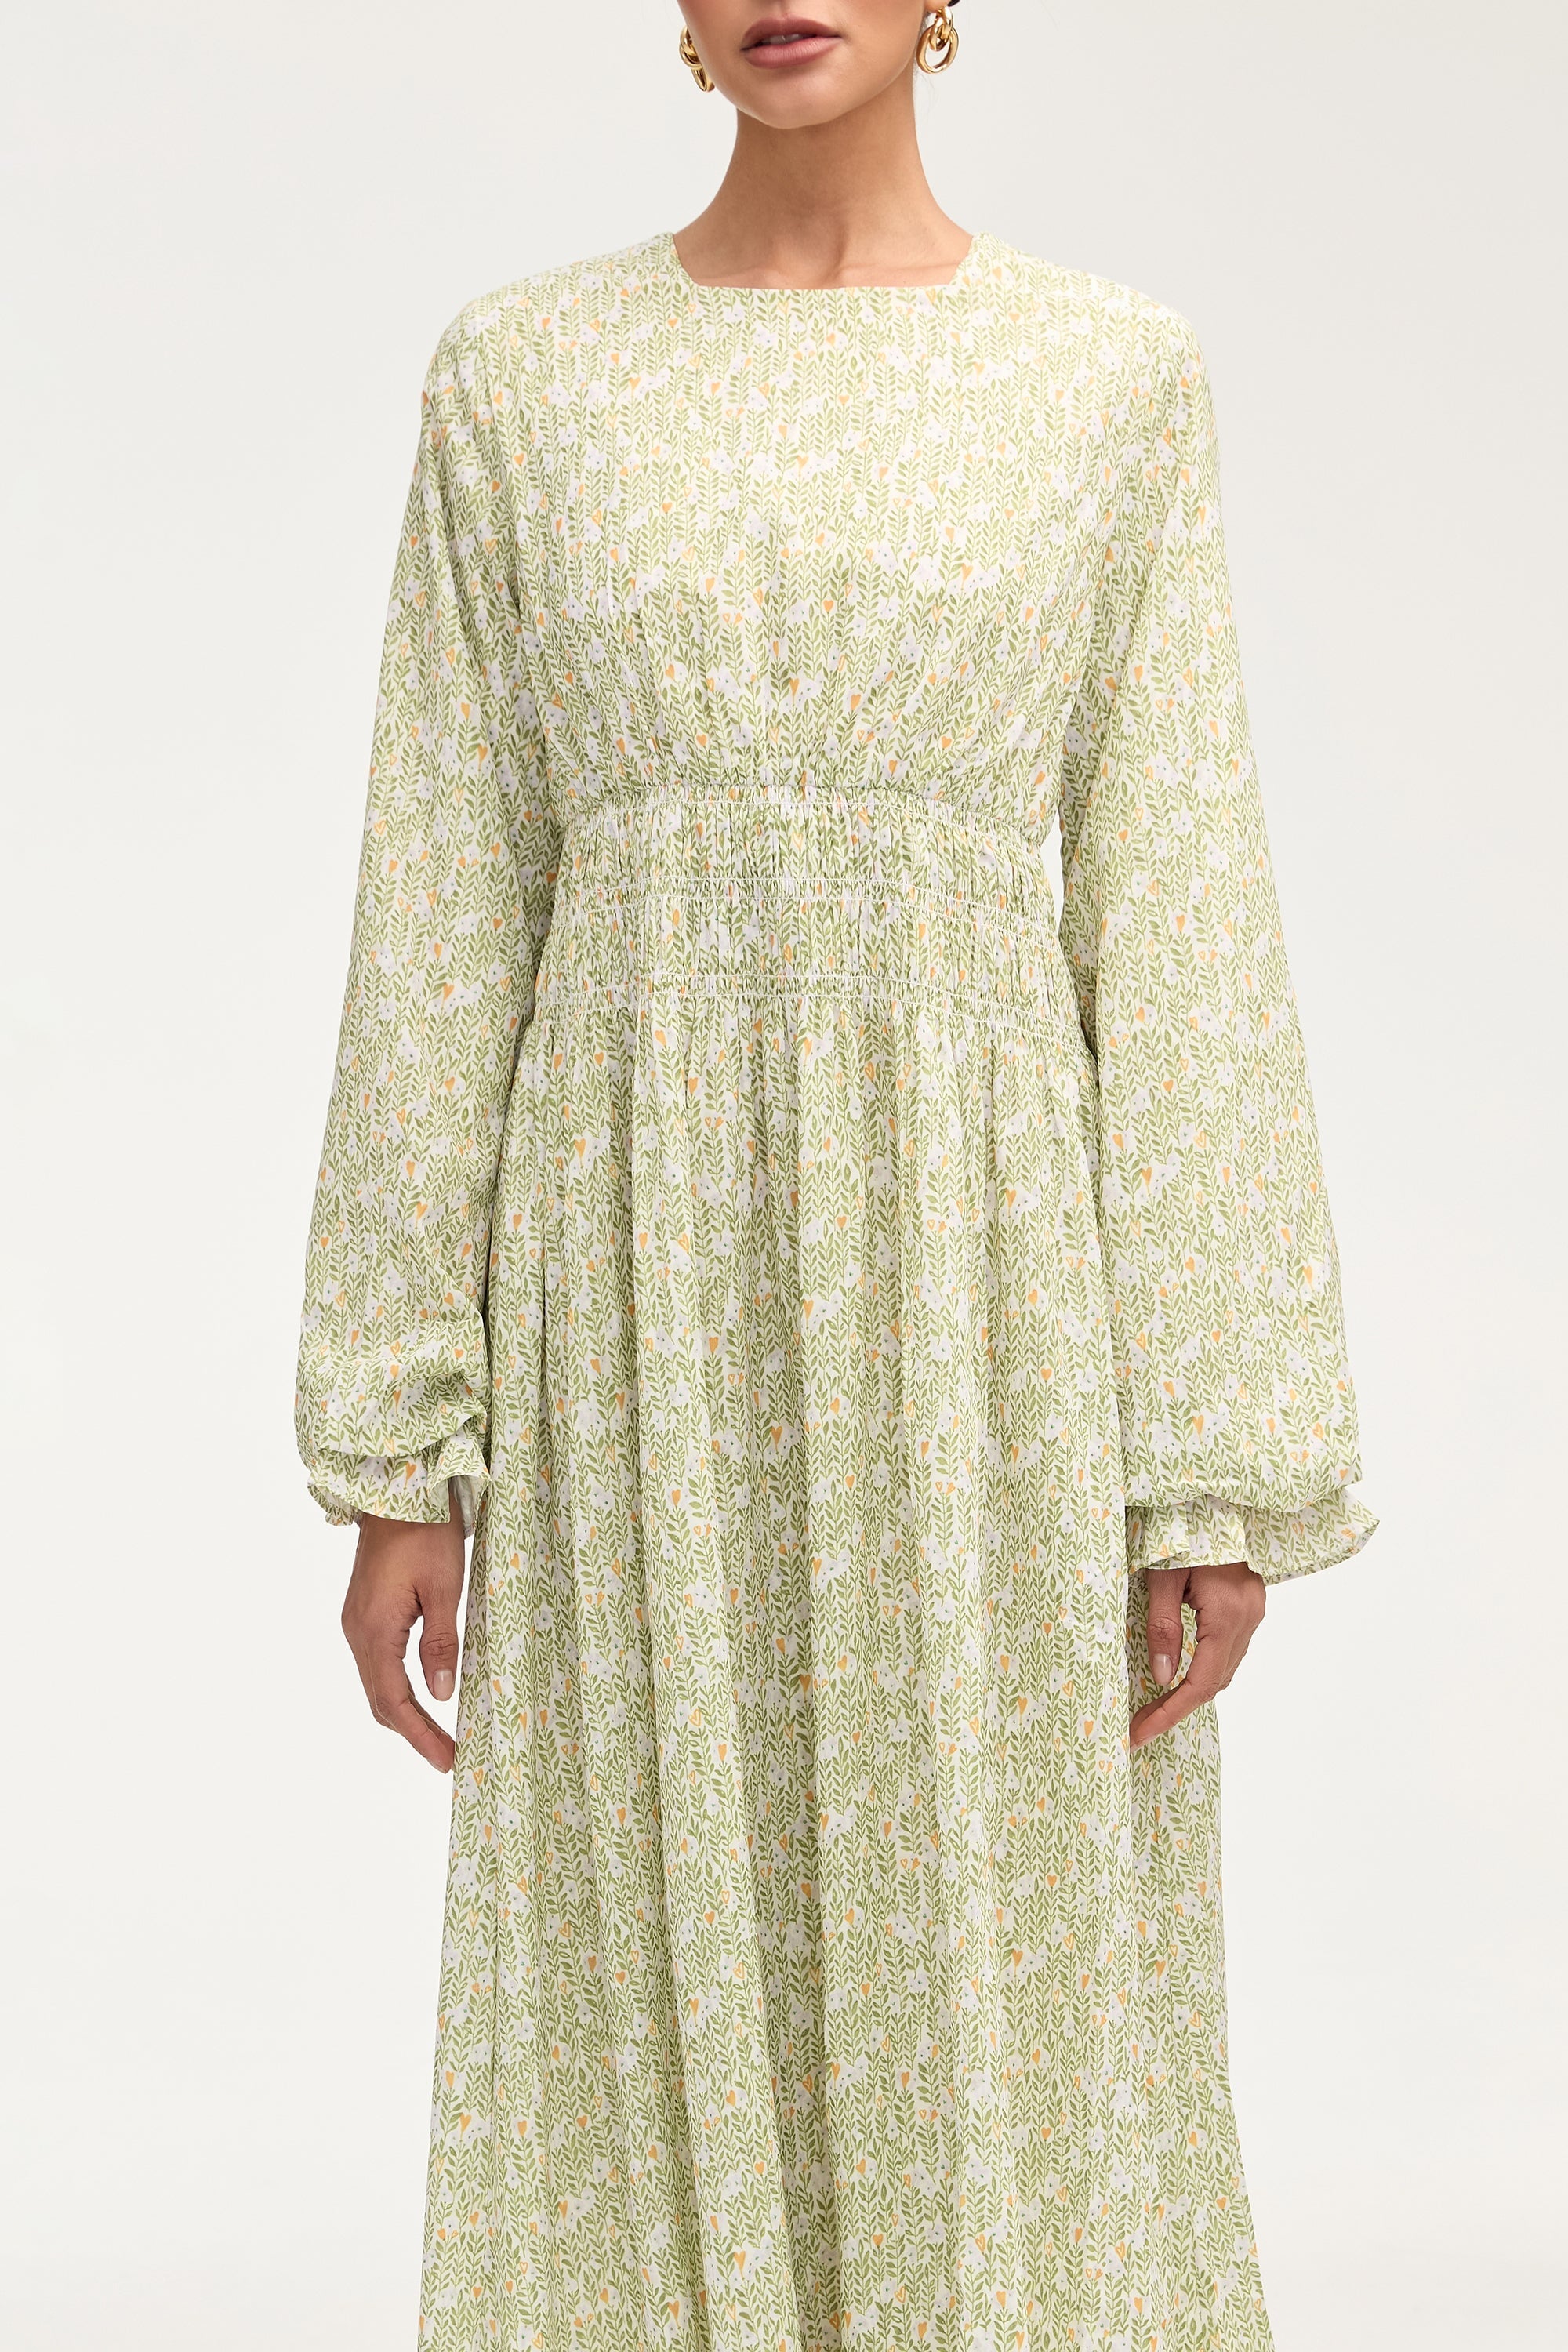 Zainab Green Floral Rouched Maxi Dress Dresses Veiled Collection 